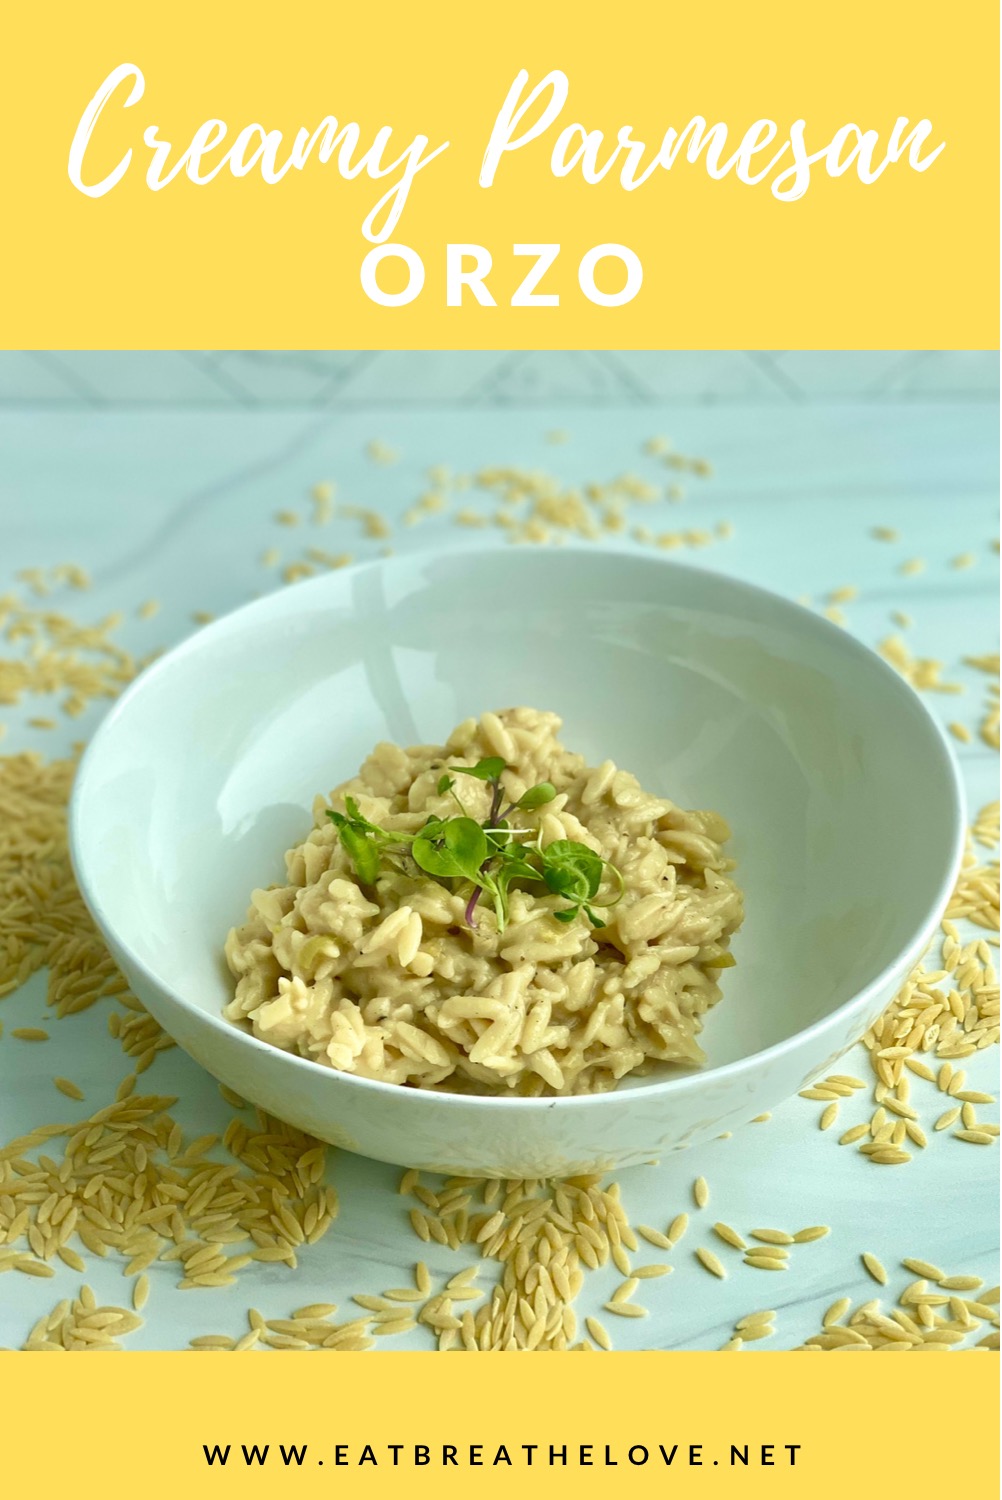 Image of creamy orzo pasta in a dish surrounded by uncooked orzo pasta